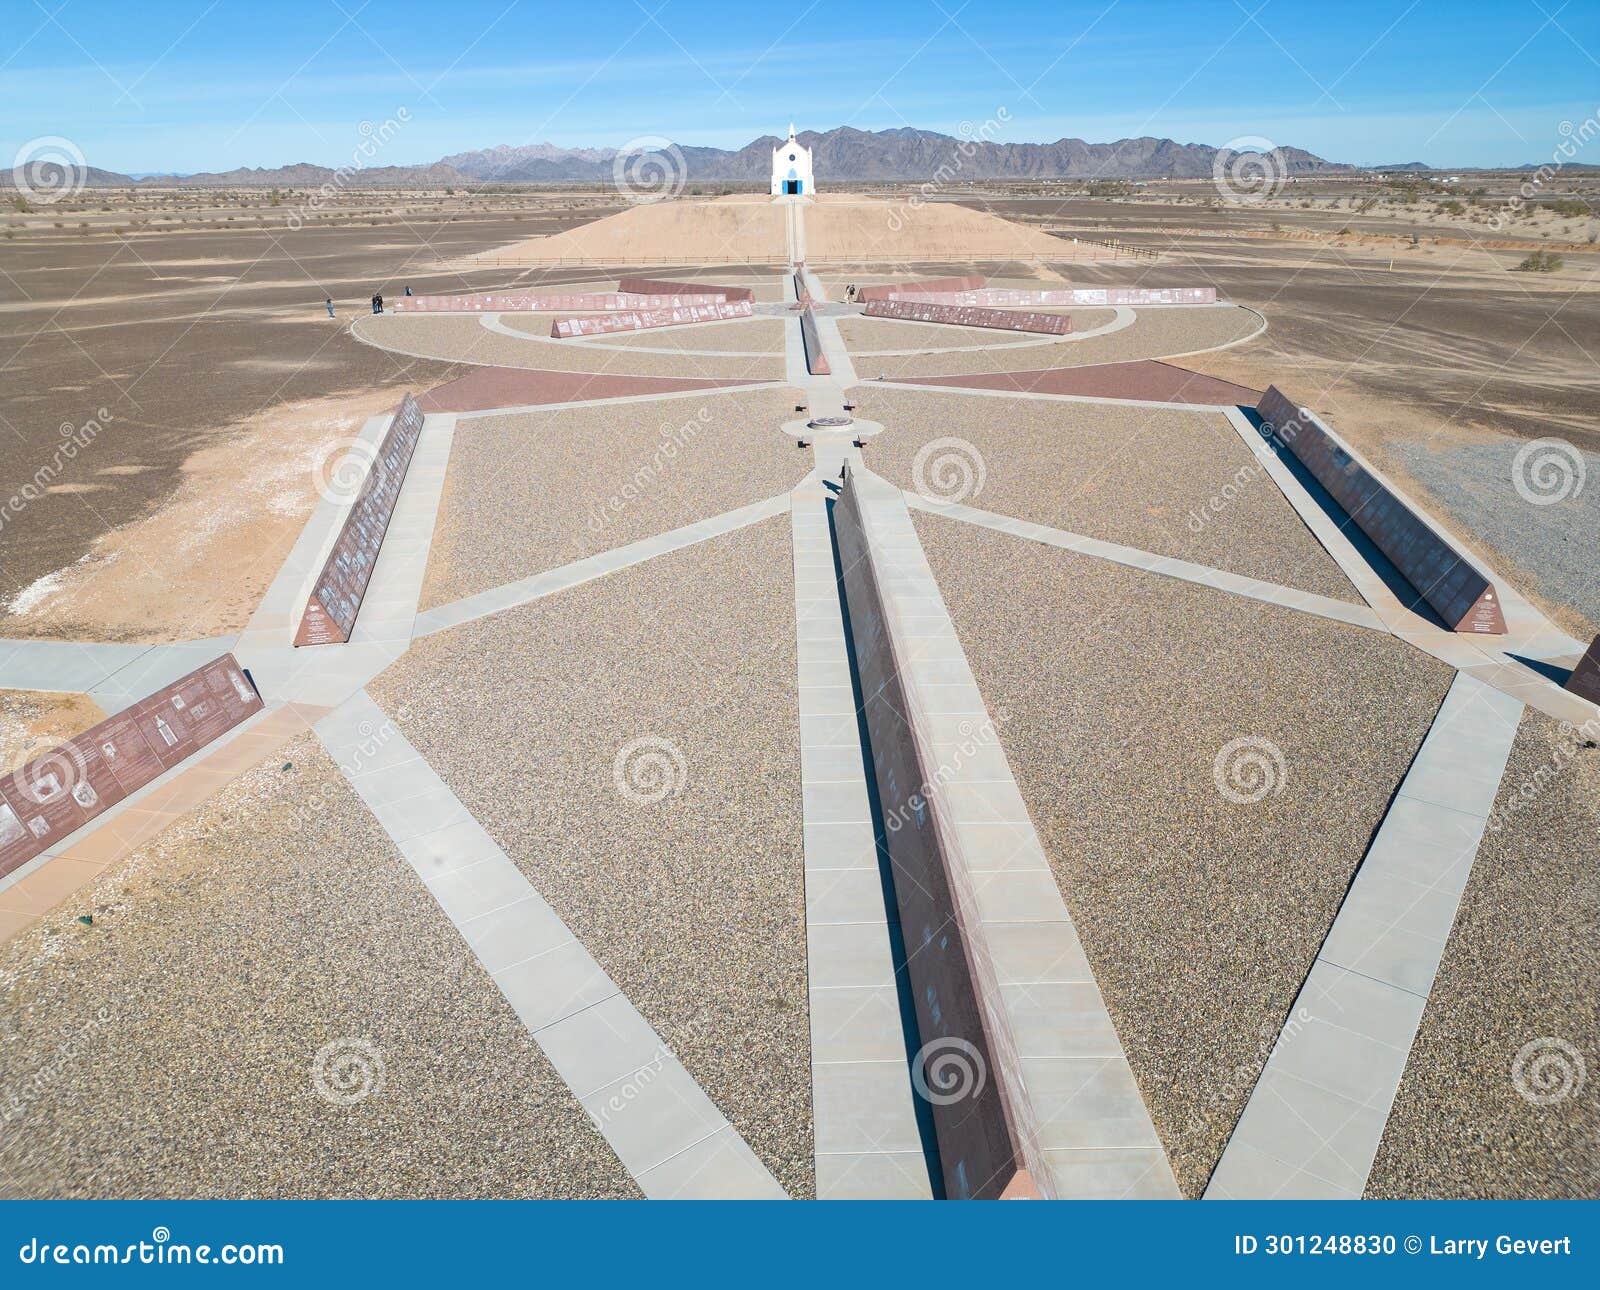 view from the air, felicity, california, history is preserved in granite